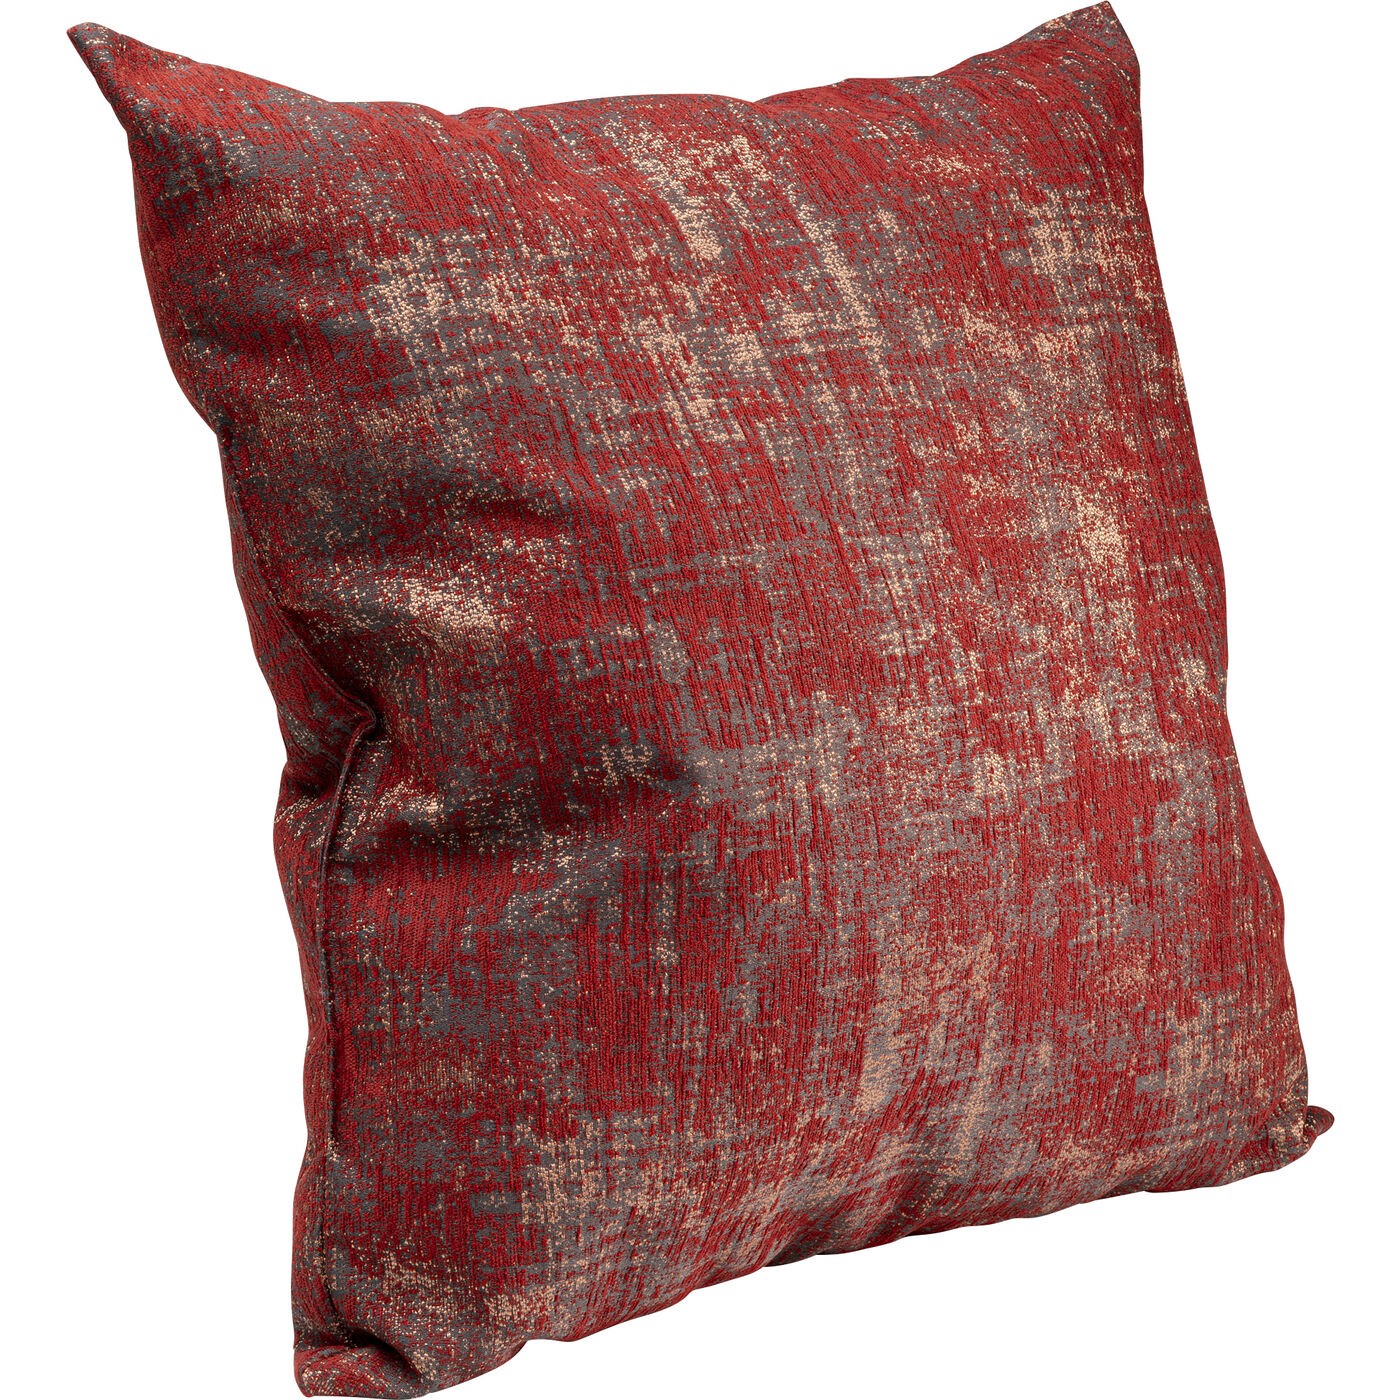 Coussin Glossy Shine rouge 60x60cm Kare Design